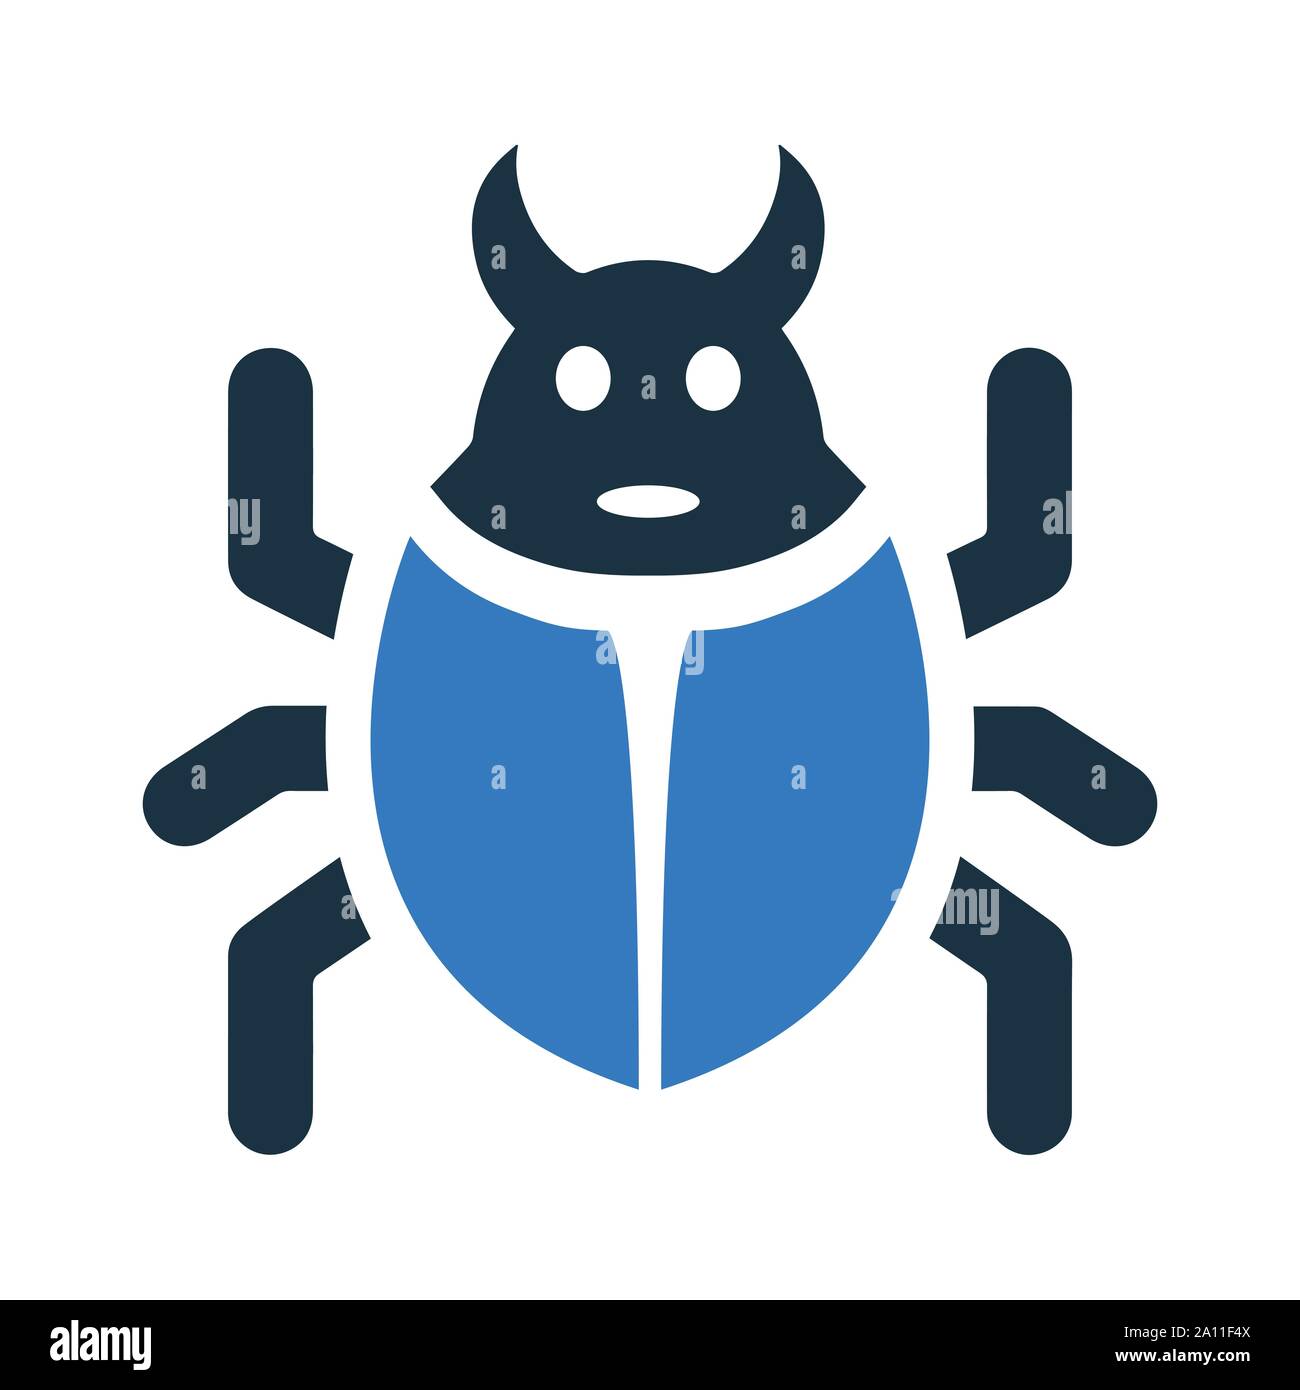 Beautiful design and fully editable Bug, fixing, repair, reparation, weak side, lapsus icon for commercial, print media, web or any type of design pro Stock Vector